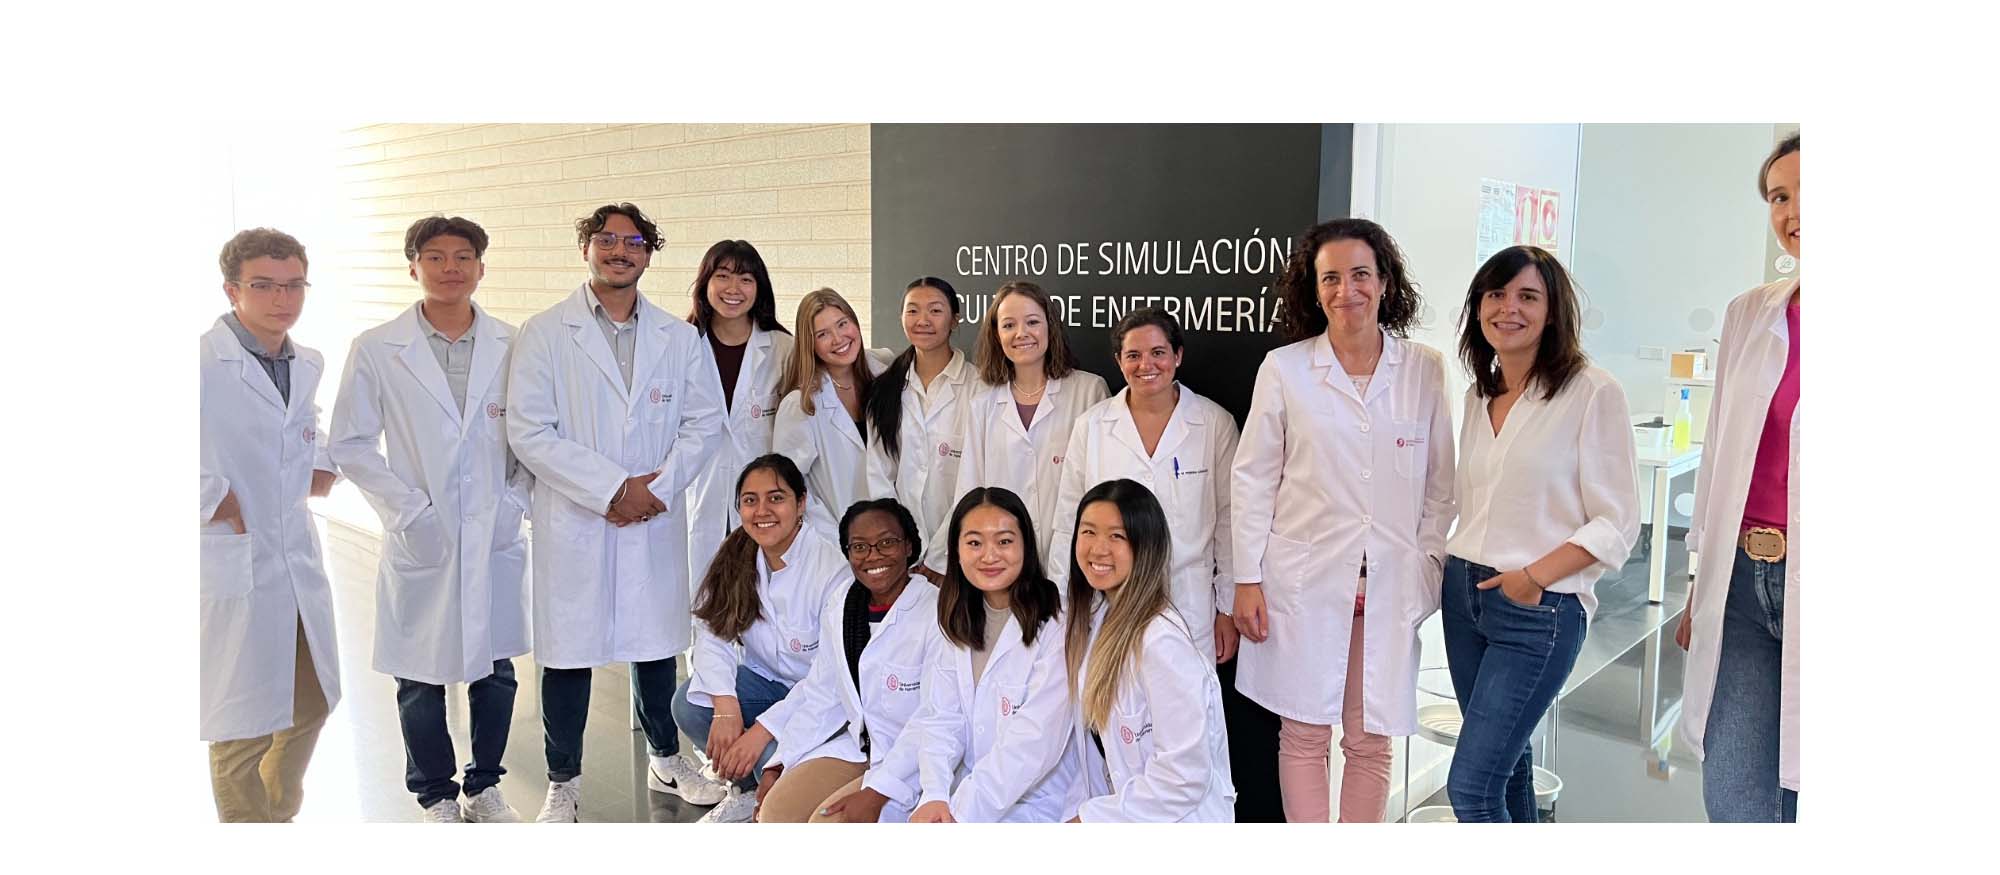 A group of Rice students wearing white lab coats smile and pose for a picture with their professors.